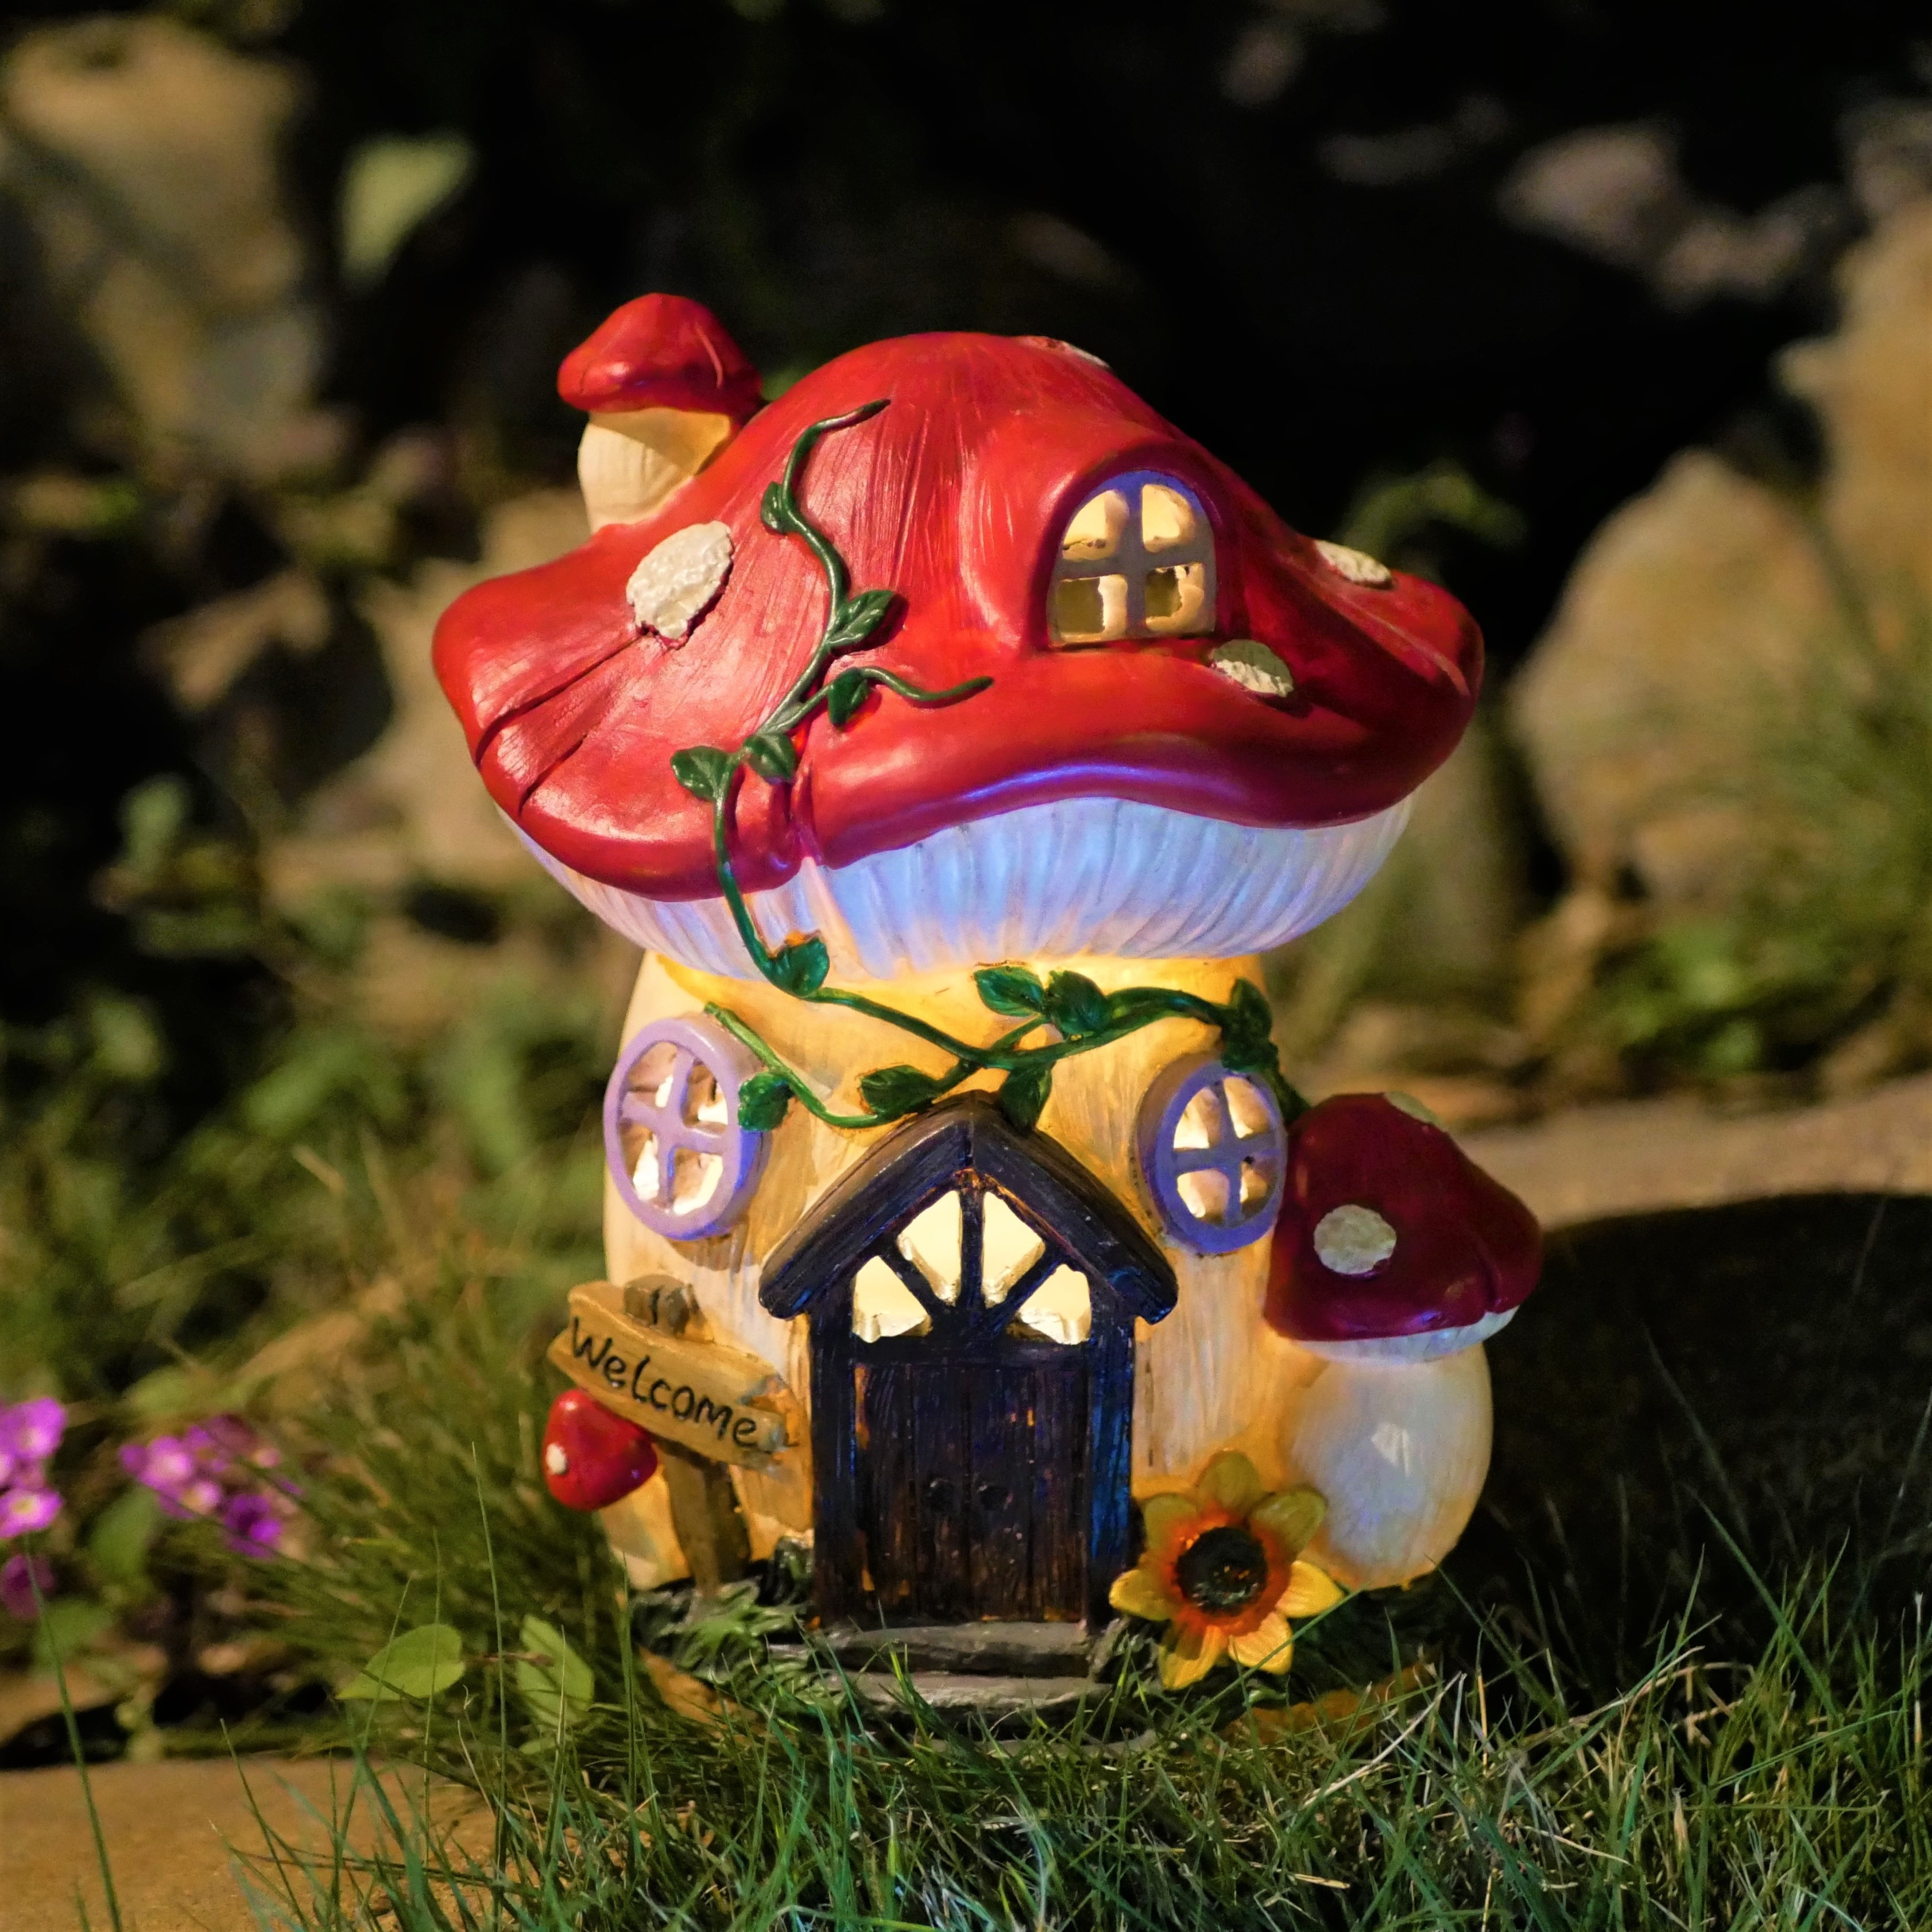 

1pc Red Mushroom Vine House Resin Solar Lantern, Suitable For Garden, Patio, Lawn, Doorway, Balcony, Pond, Window Sill, Special Gift For Friends On Holidays